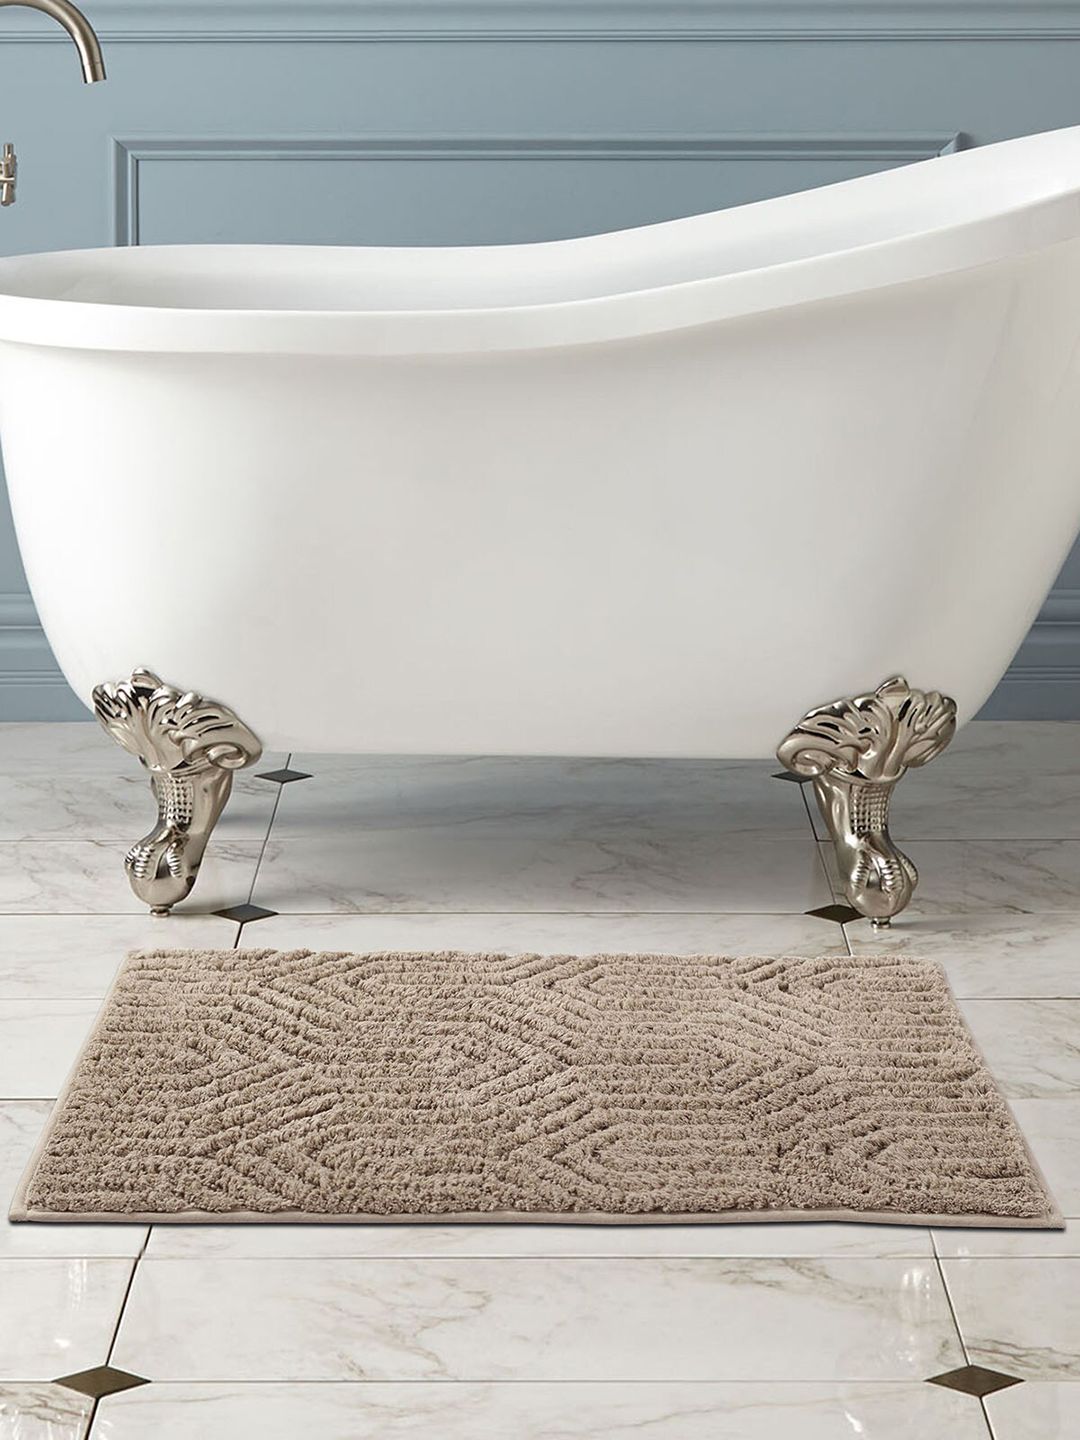 OBSESSIONS Taupe Self Design Rectangular Bath Rug Price in India